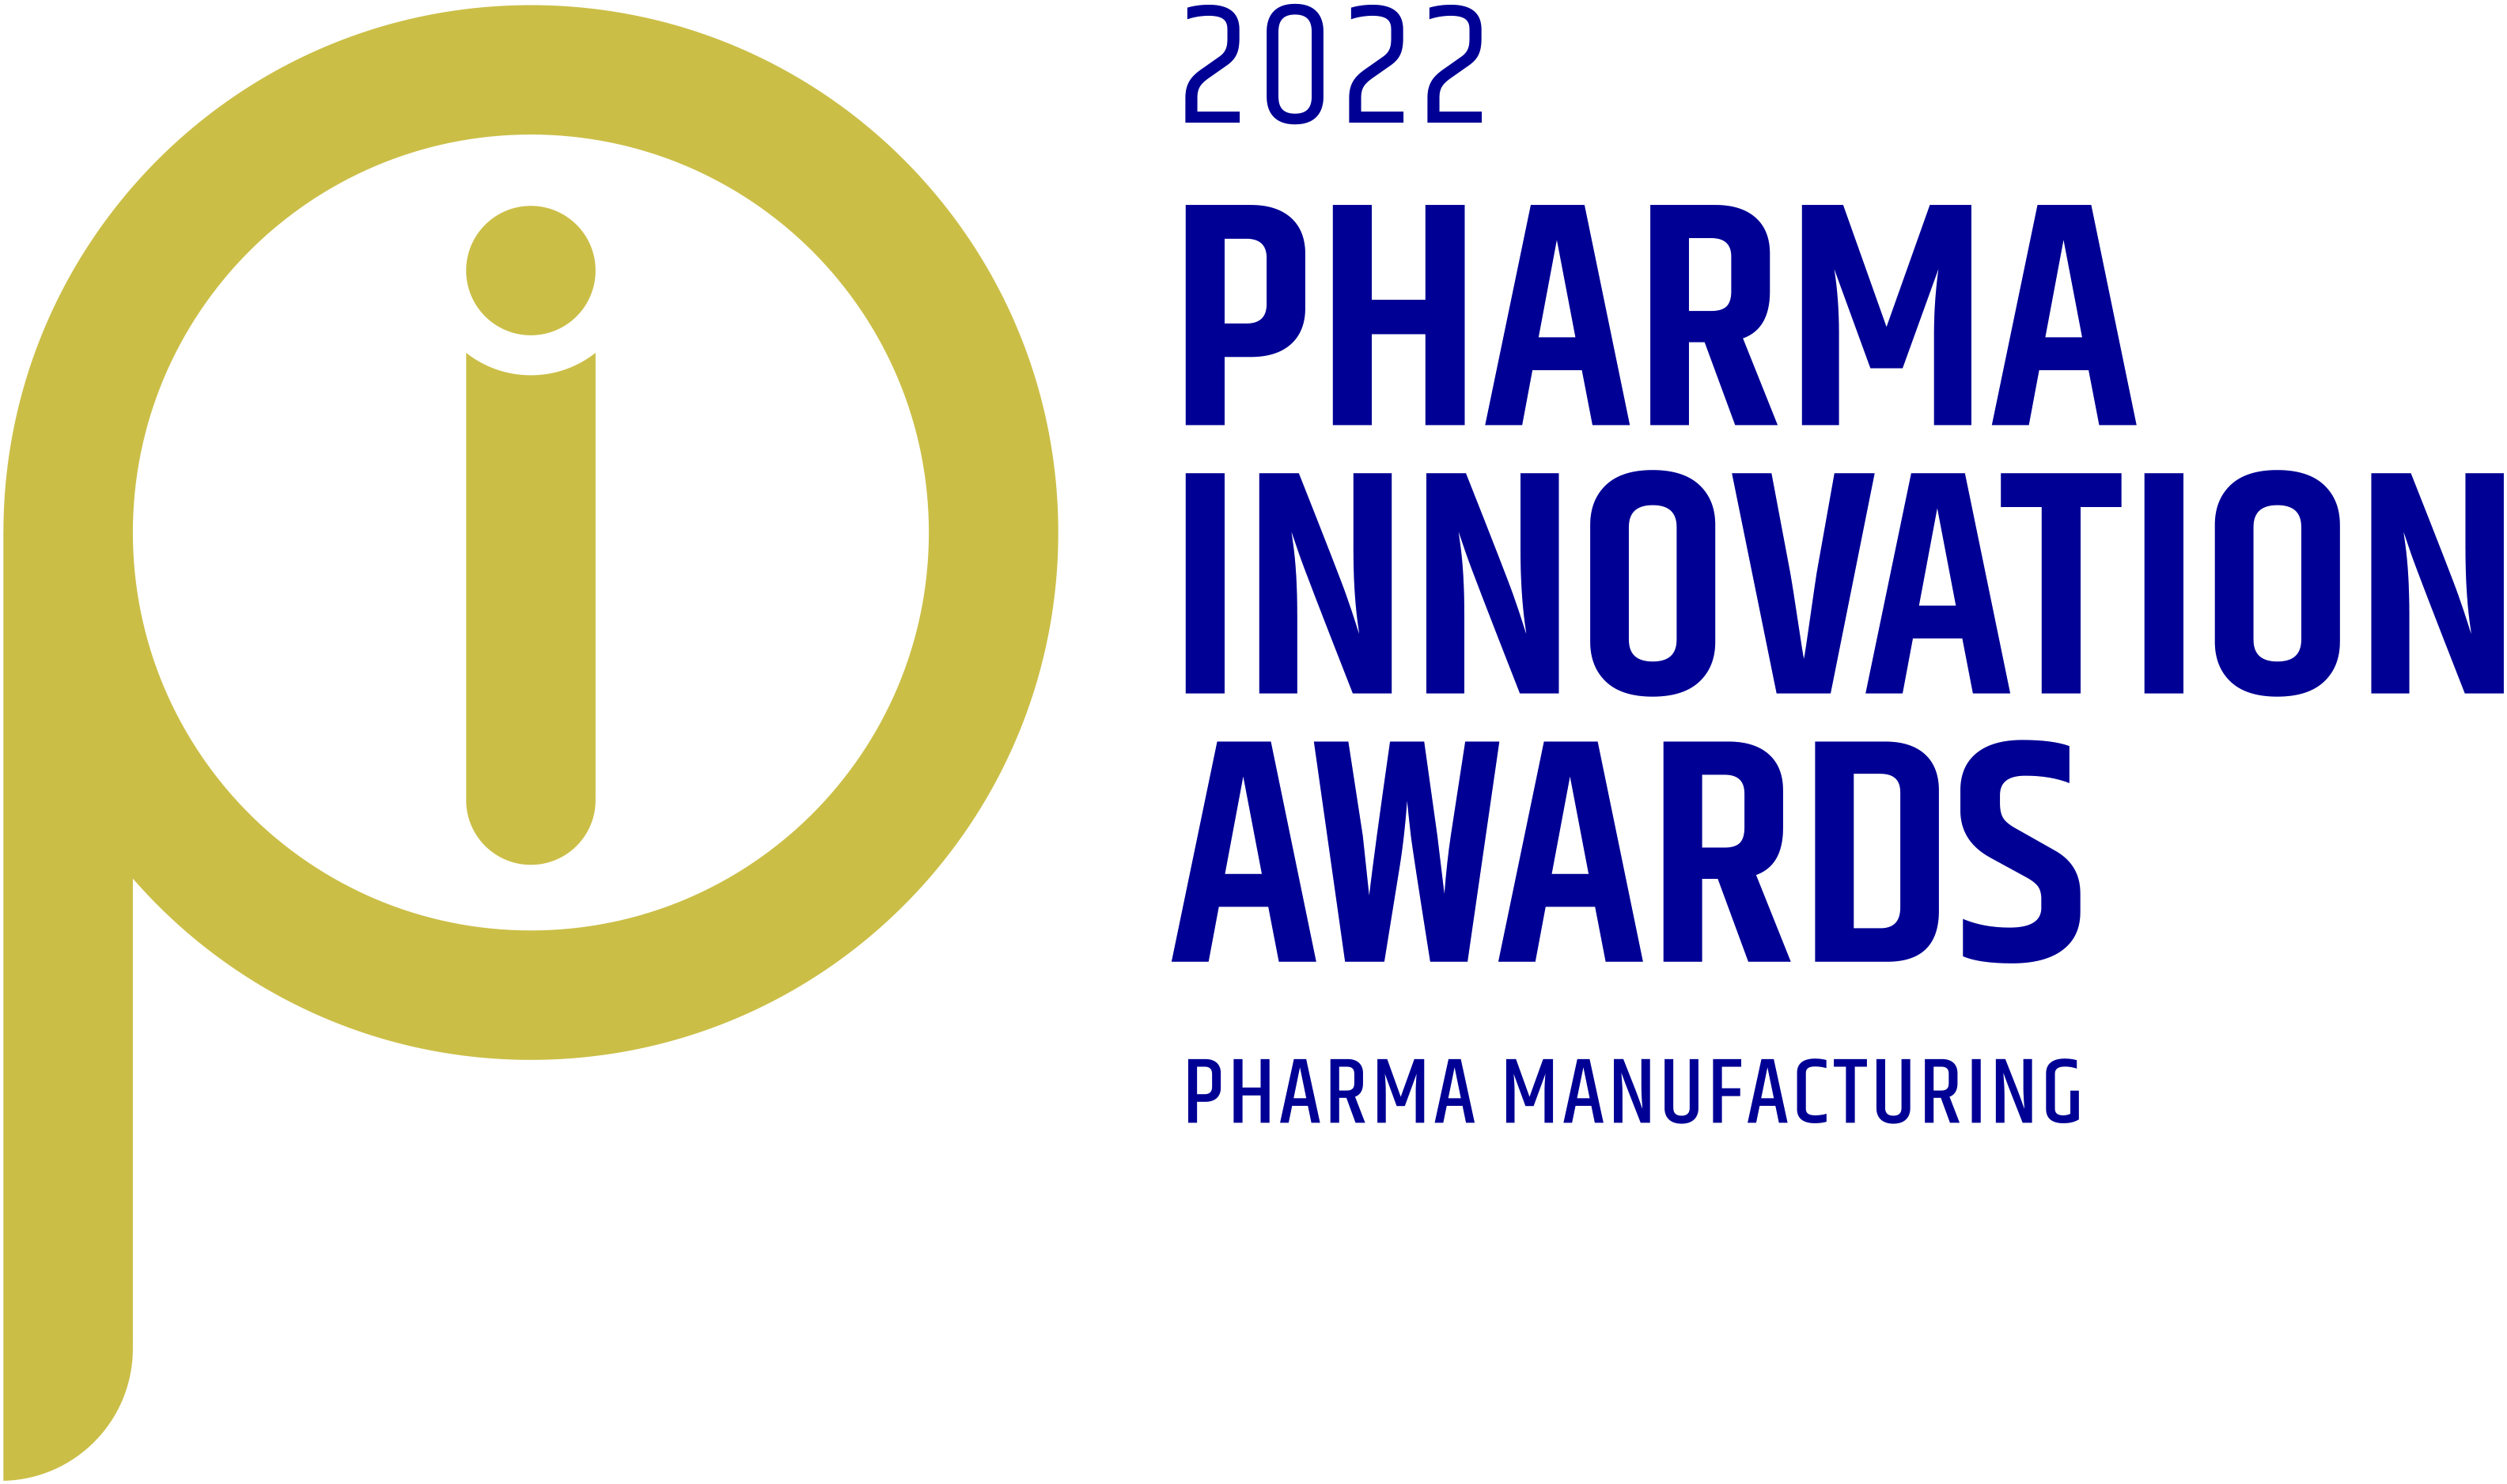 Optimal Industrial Automation’s flagship automated system, iPass™, has received a 2022 Pharma Innovation Award from Pharma Manufacturing